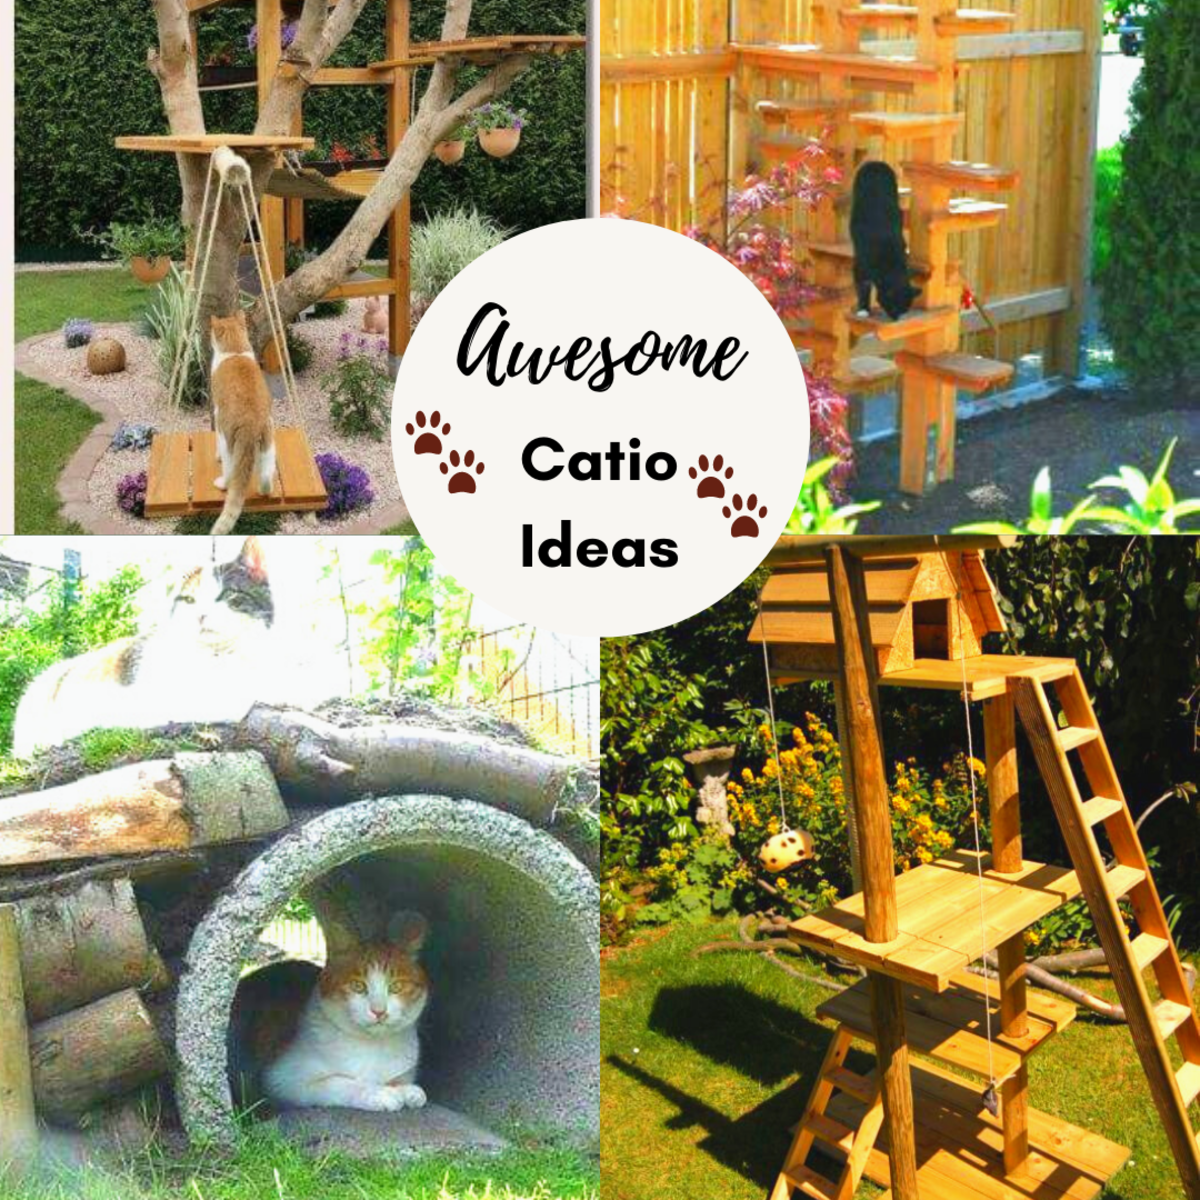 Does your feline friend need a catio? Read on for inspiration!